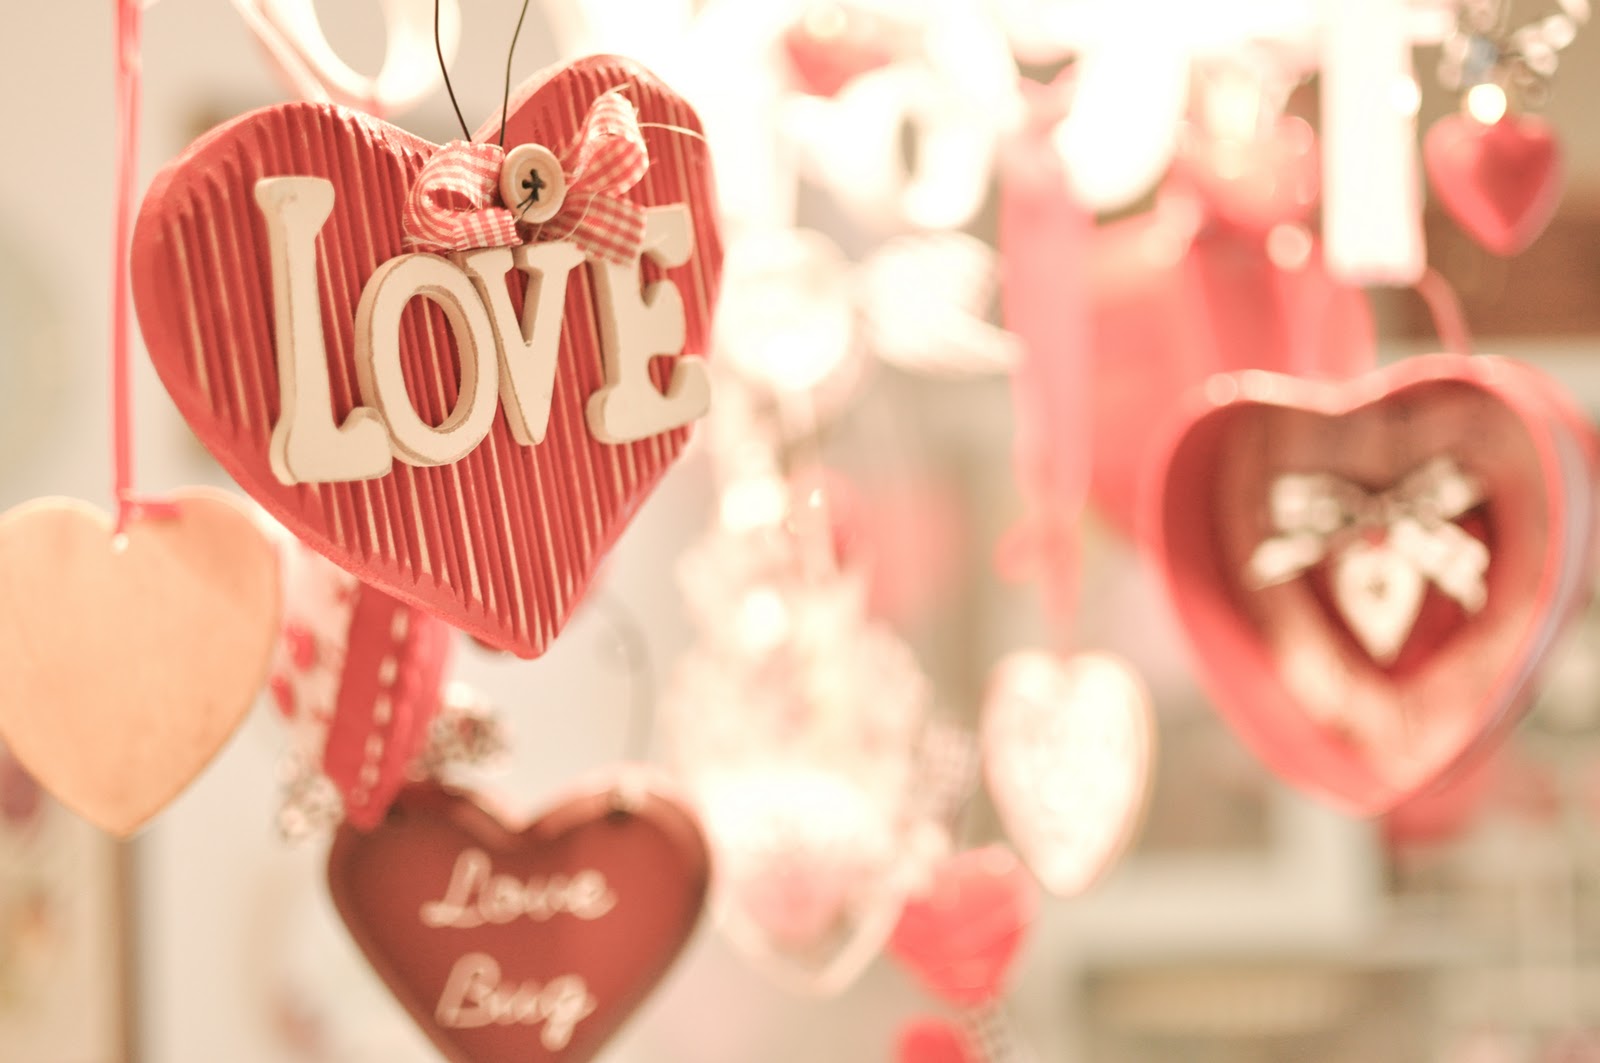 valentine's day decorations ideas 2013 to decorate bedroom,office ...